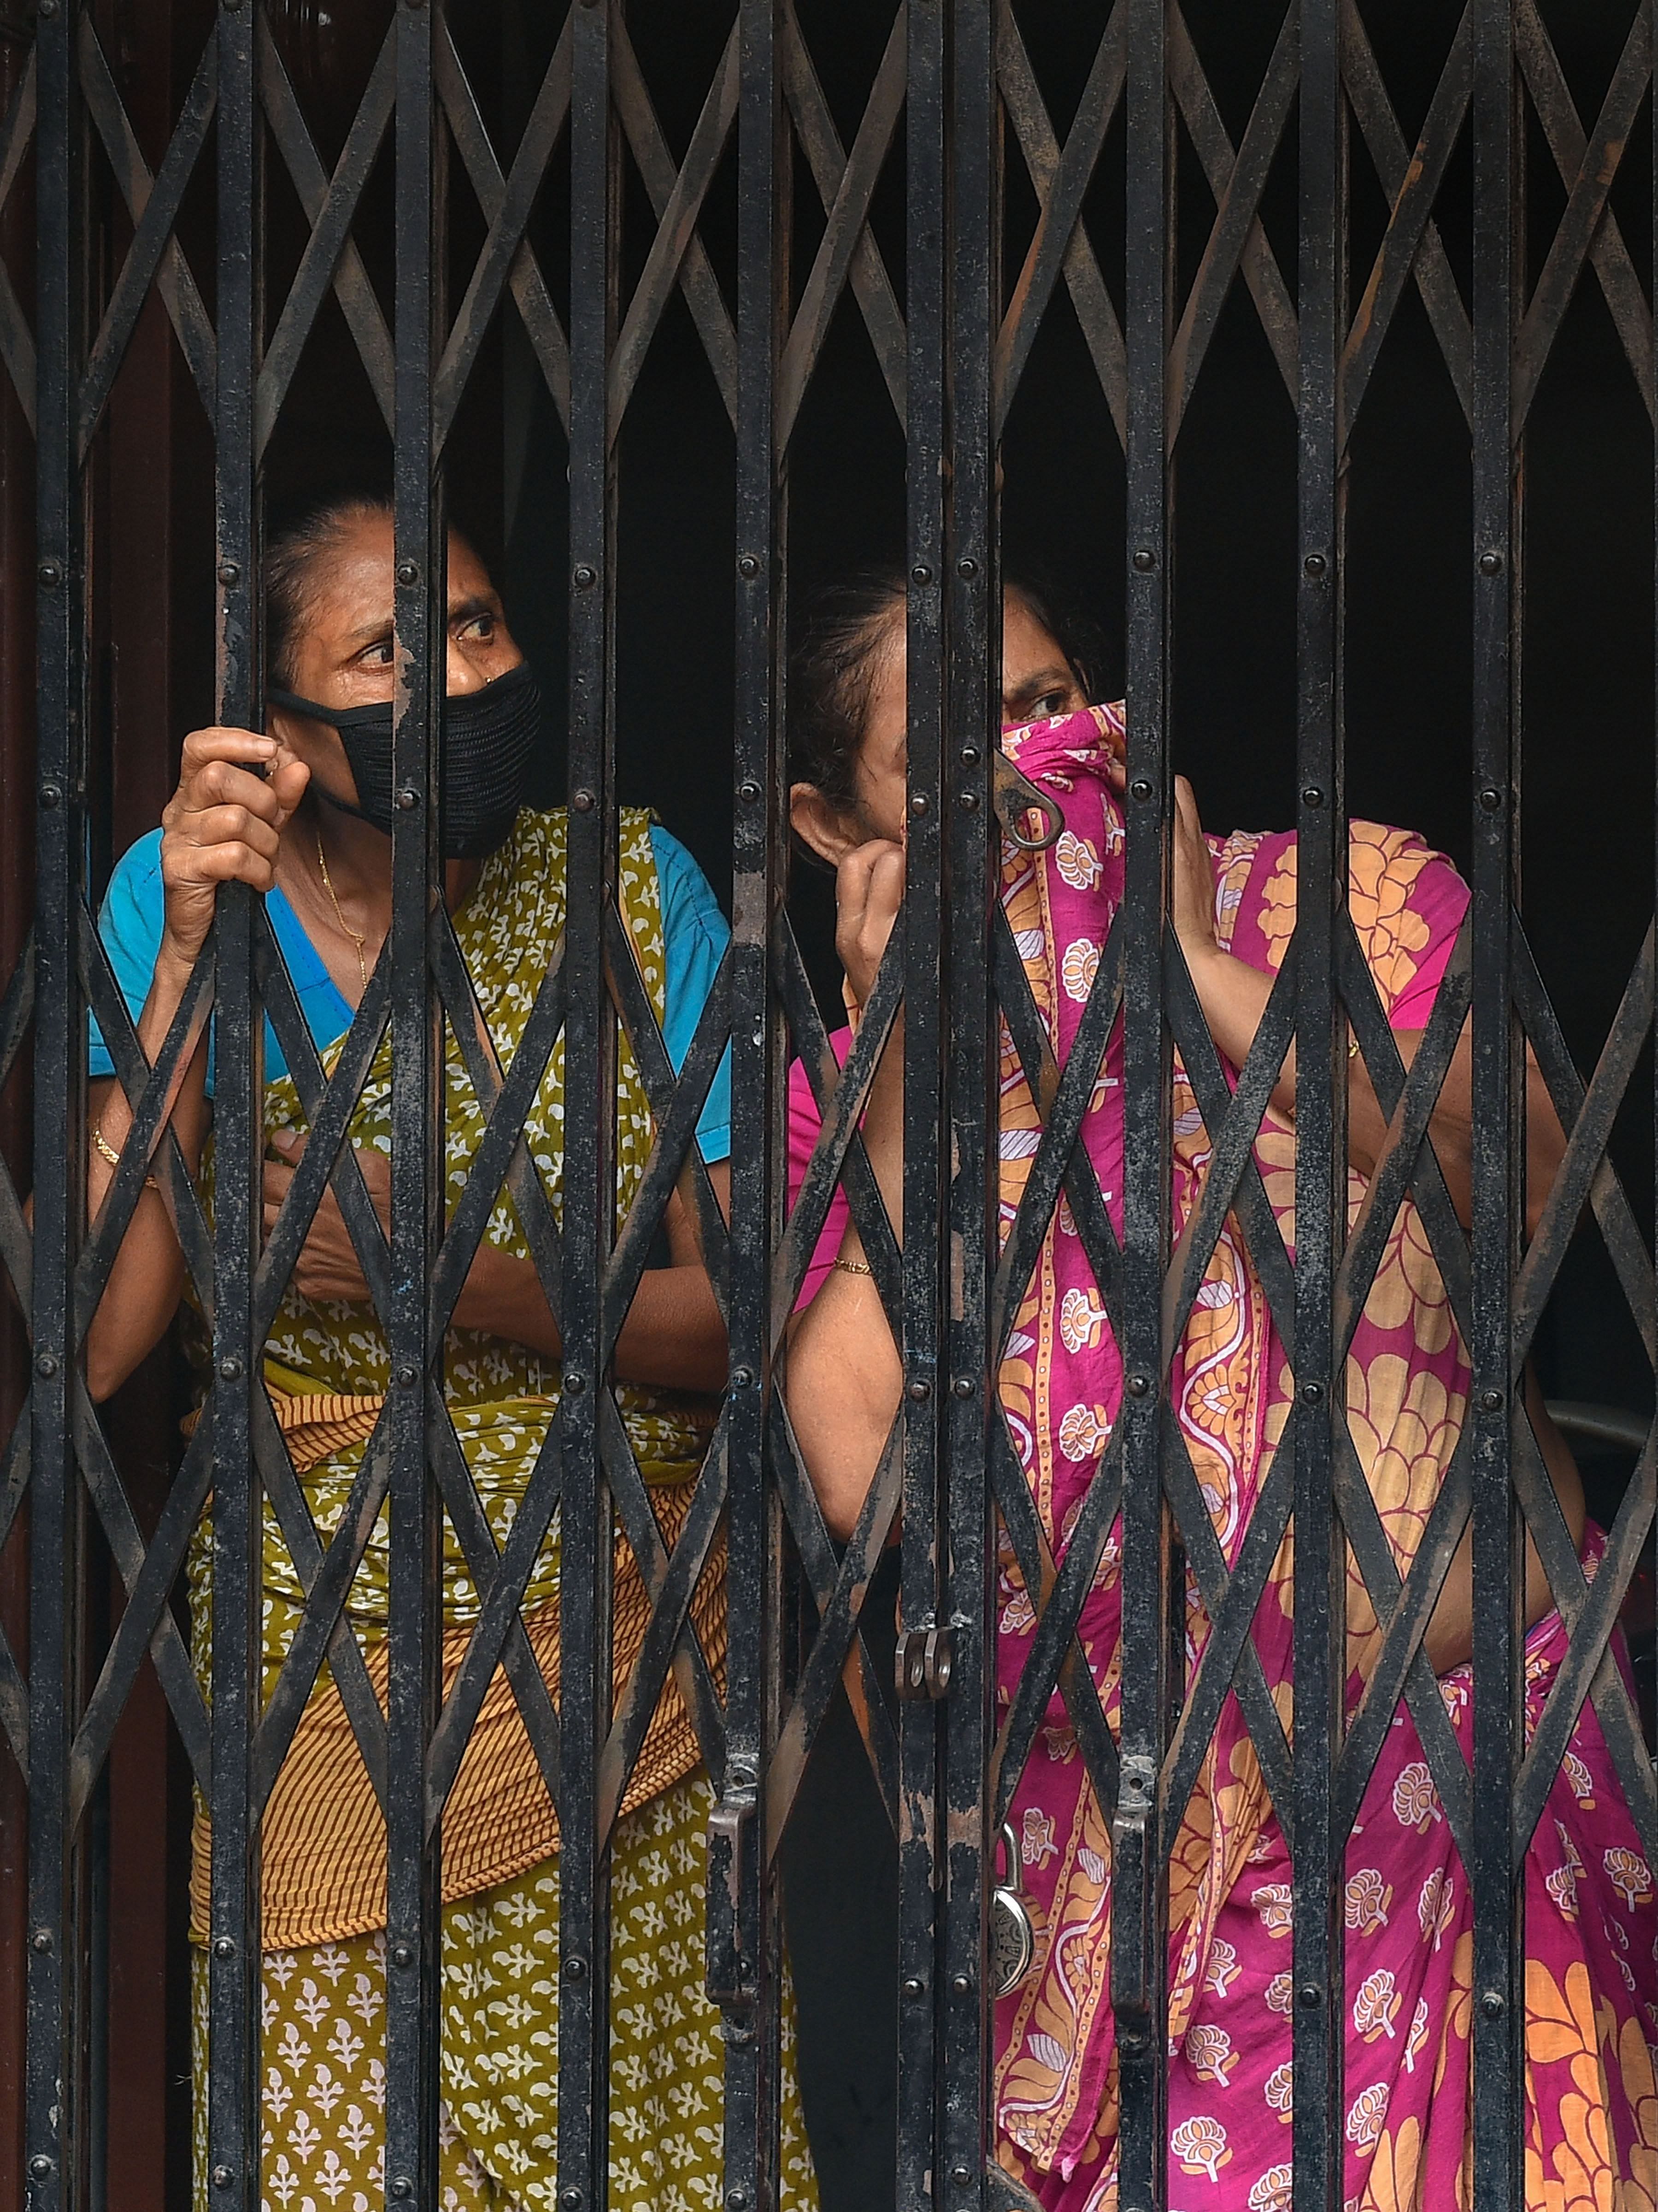 Neighbours look on as KMC workers transport a 71-year-old COVID-19 victim from his residence, in Kolkata, Wednesday, July 1, 2020. (PTI Photo)